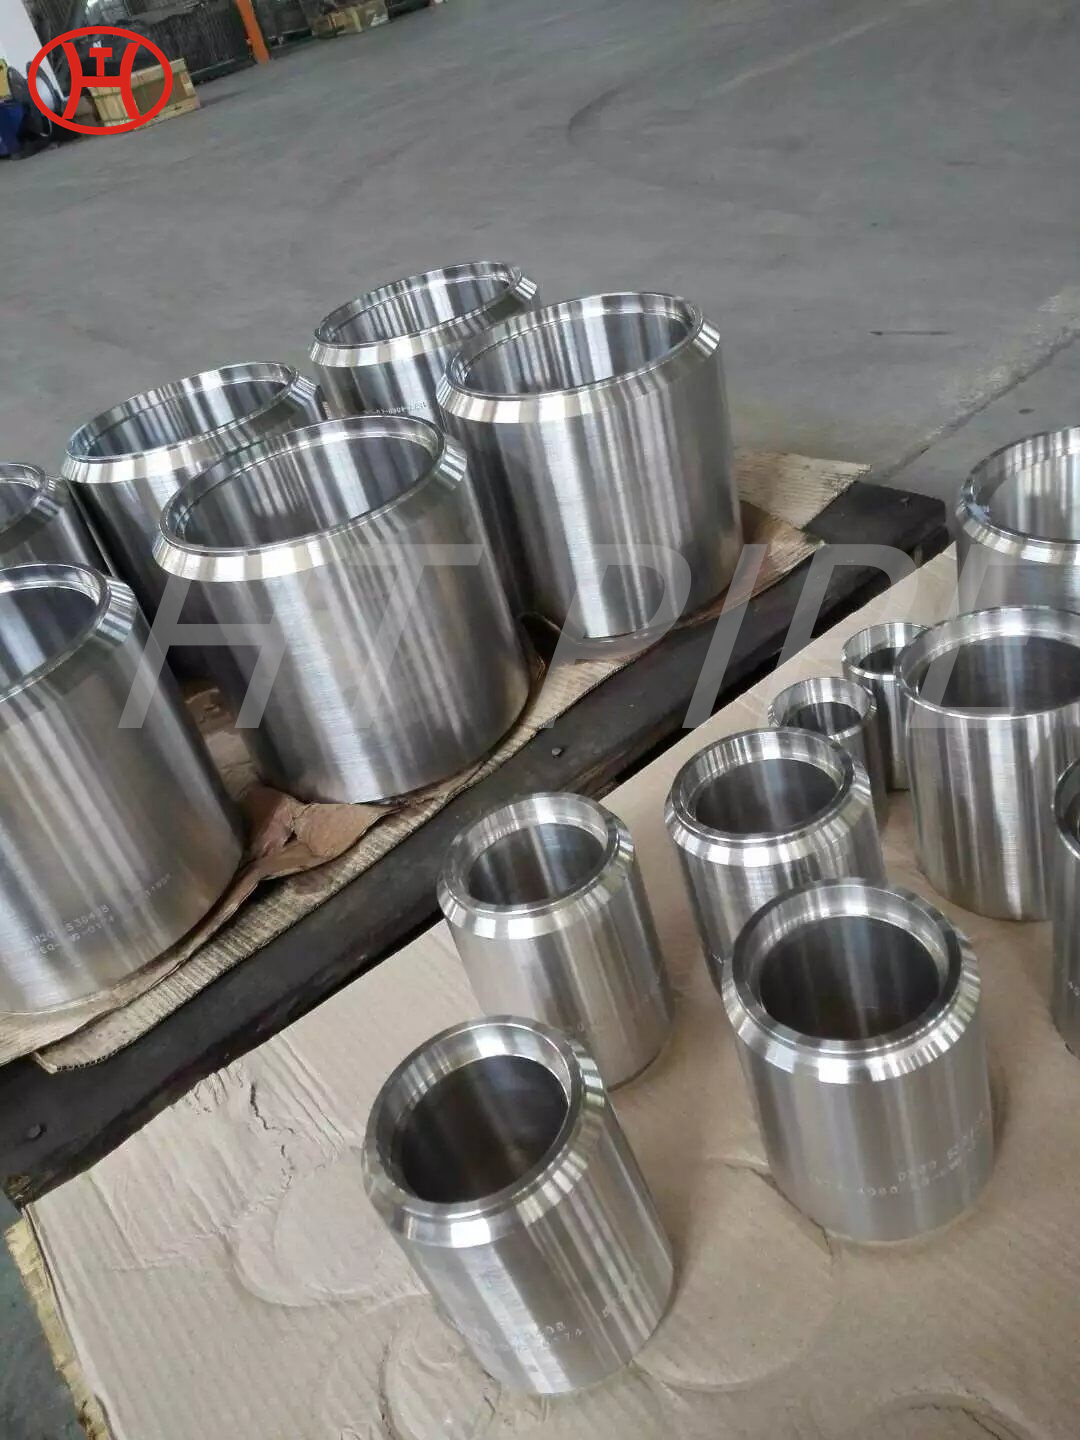 ASTM A182 F5 F11 F12 F91flanges for high pressure services like heat exchangers